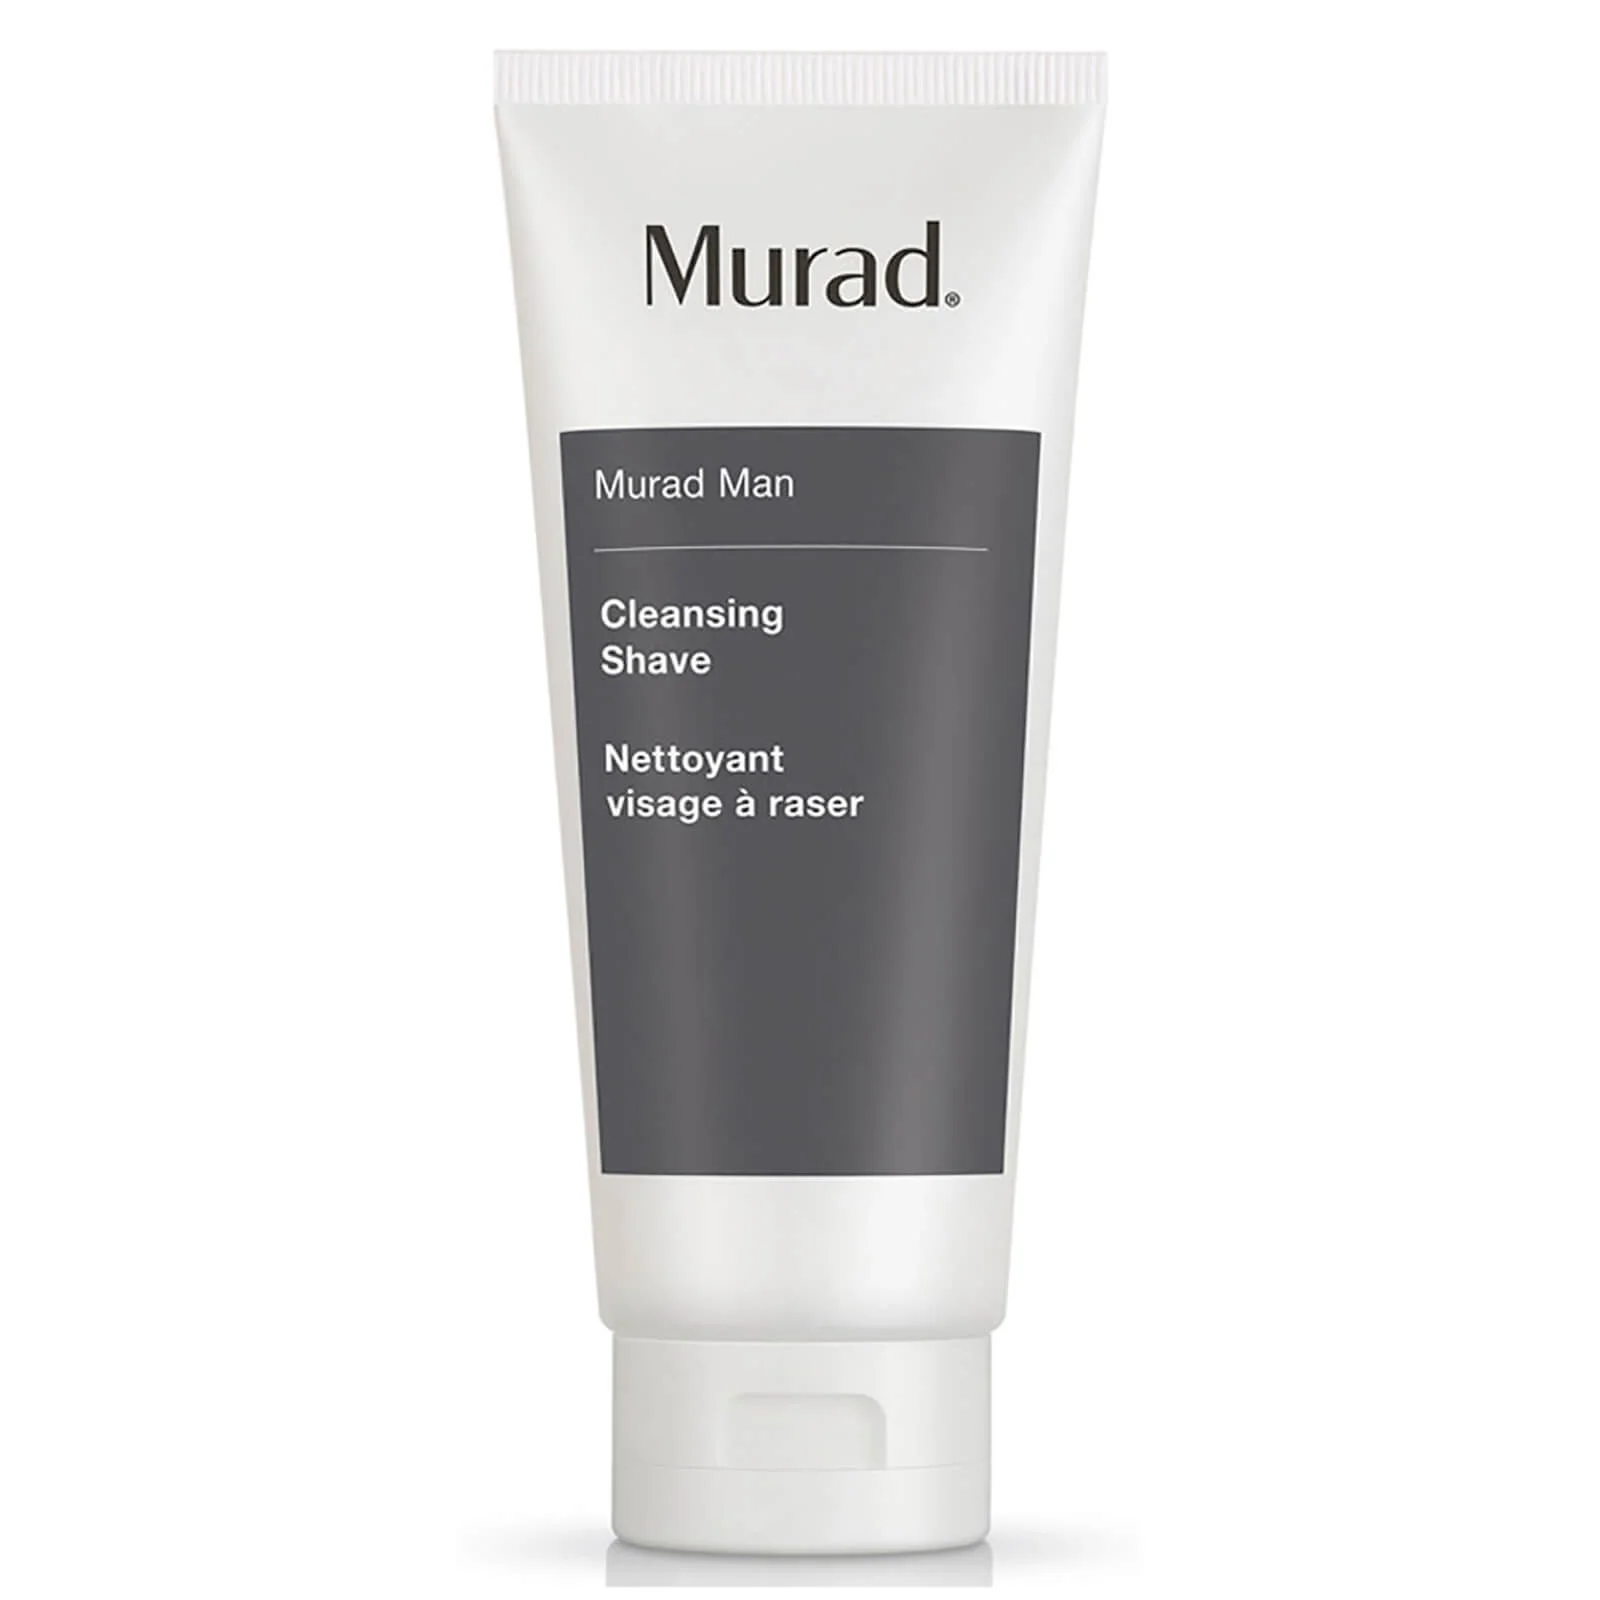 Murad Man Cleansing Shave (200ml) Image 1